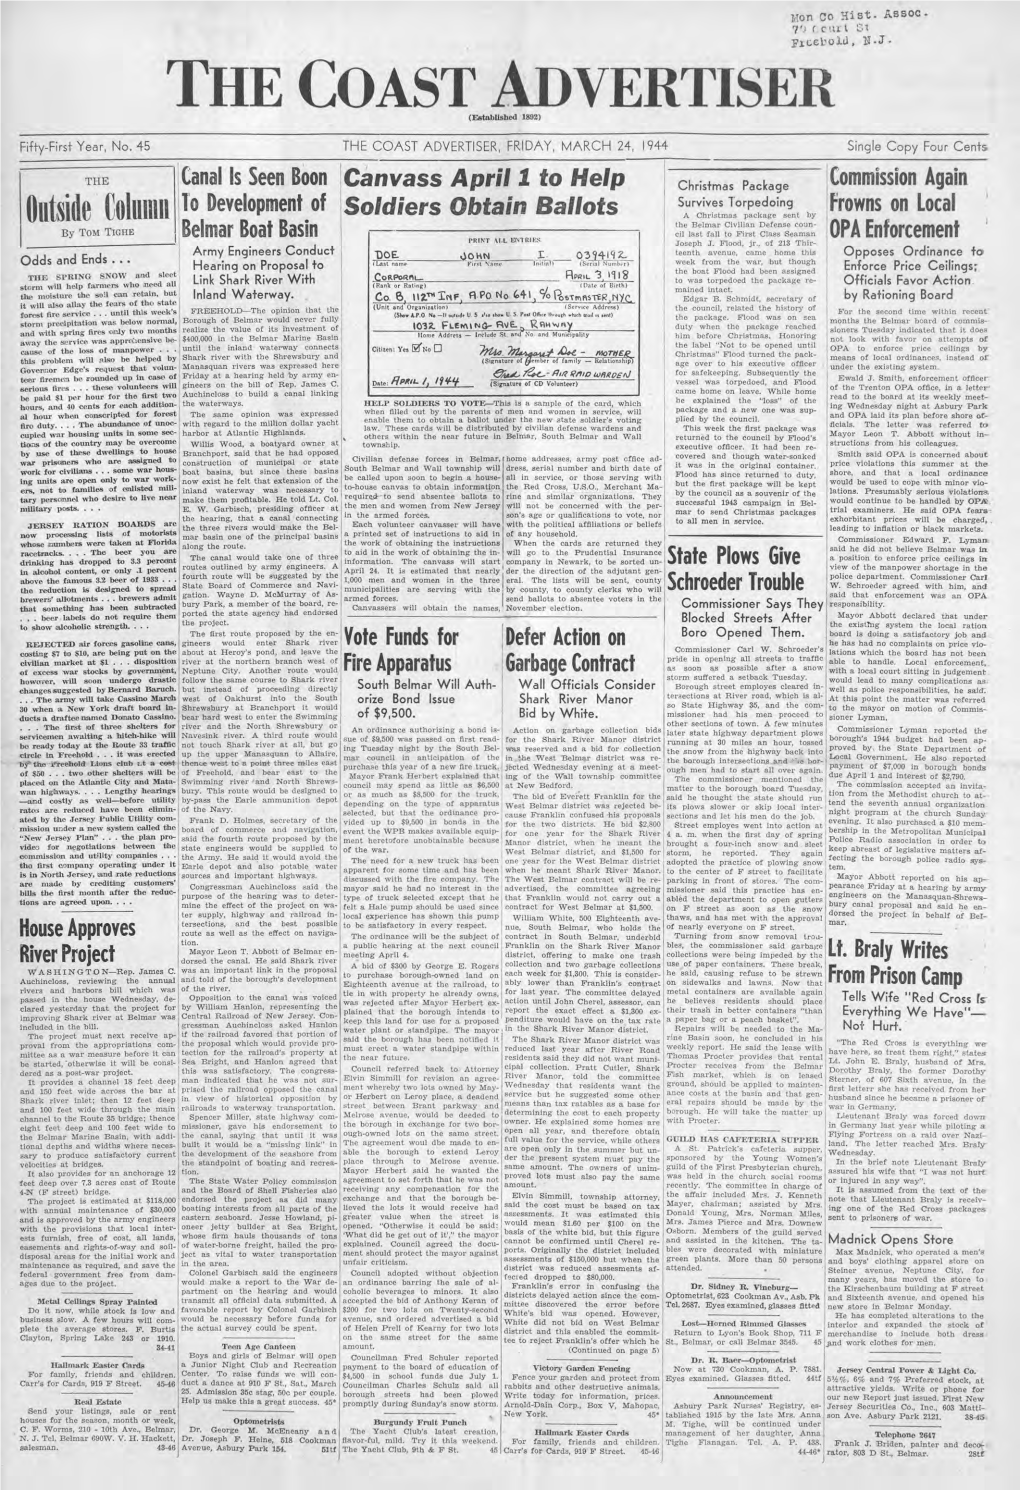 THE COAST ADVERTISER, FRIDAY, MARCH 24, 1944 Single Copy Four Cents